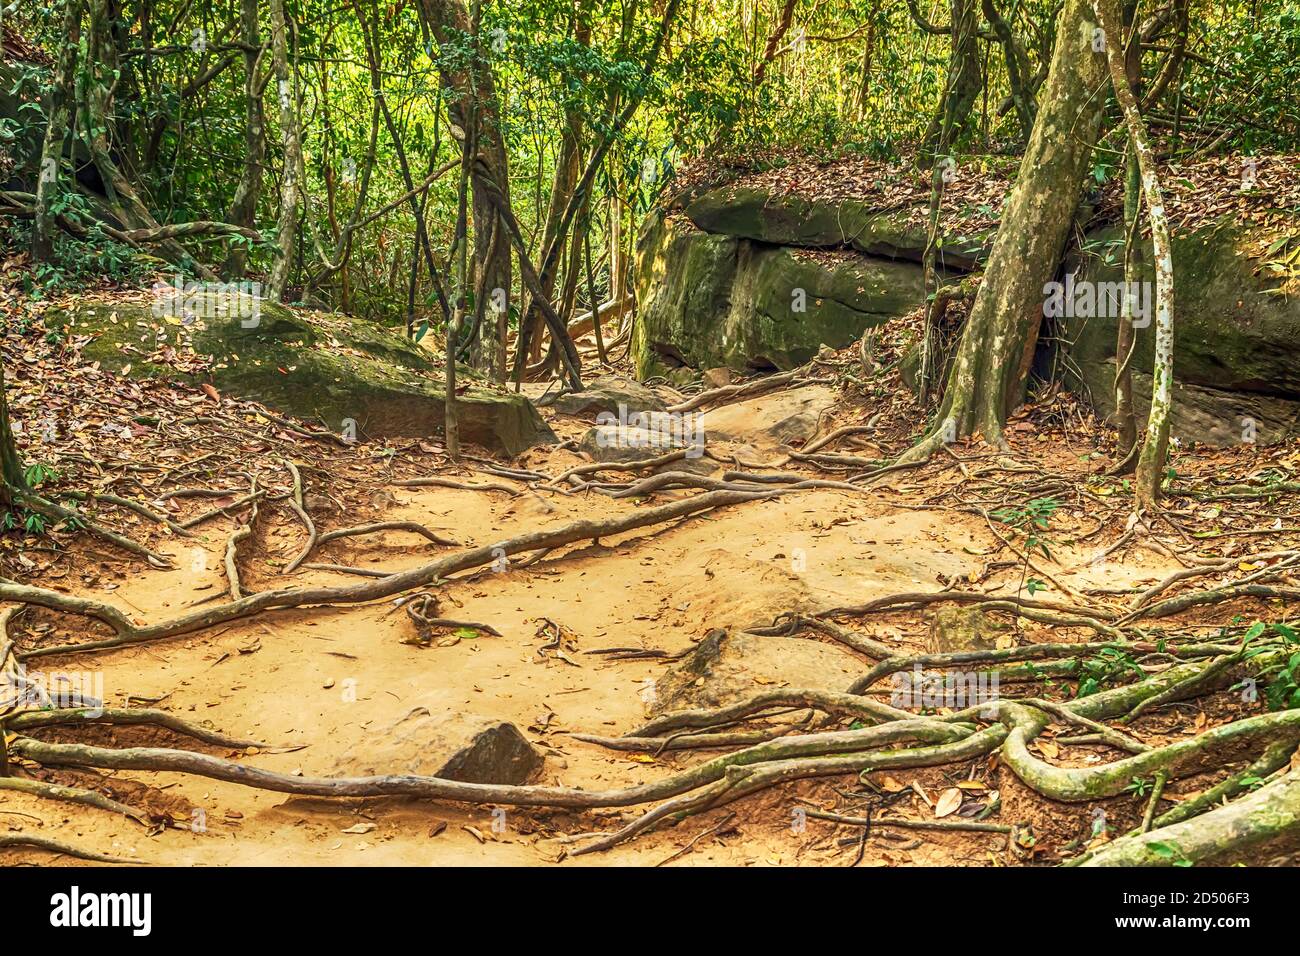 Close up exotic jungle root Walk ancient Angkor temples. Phnom Kulen park in Cambodia, located in the Phnom Kulen mountain massif in Siem Reap Provinc Stock Photo